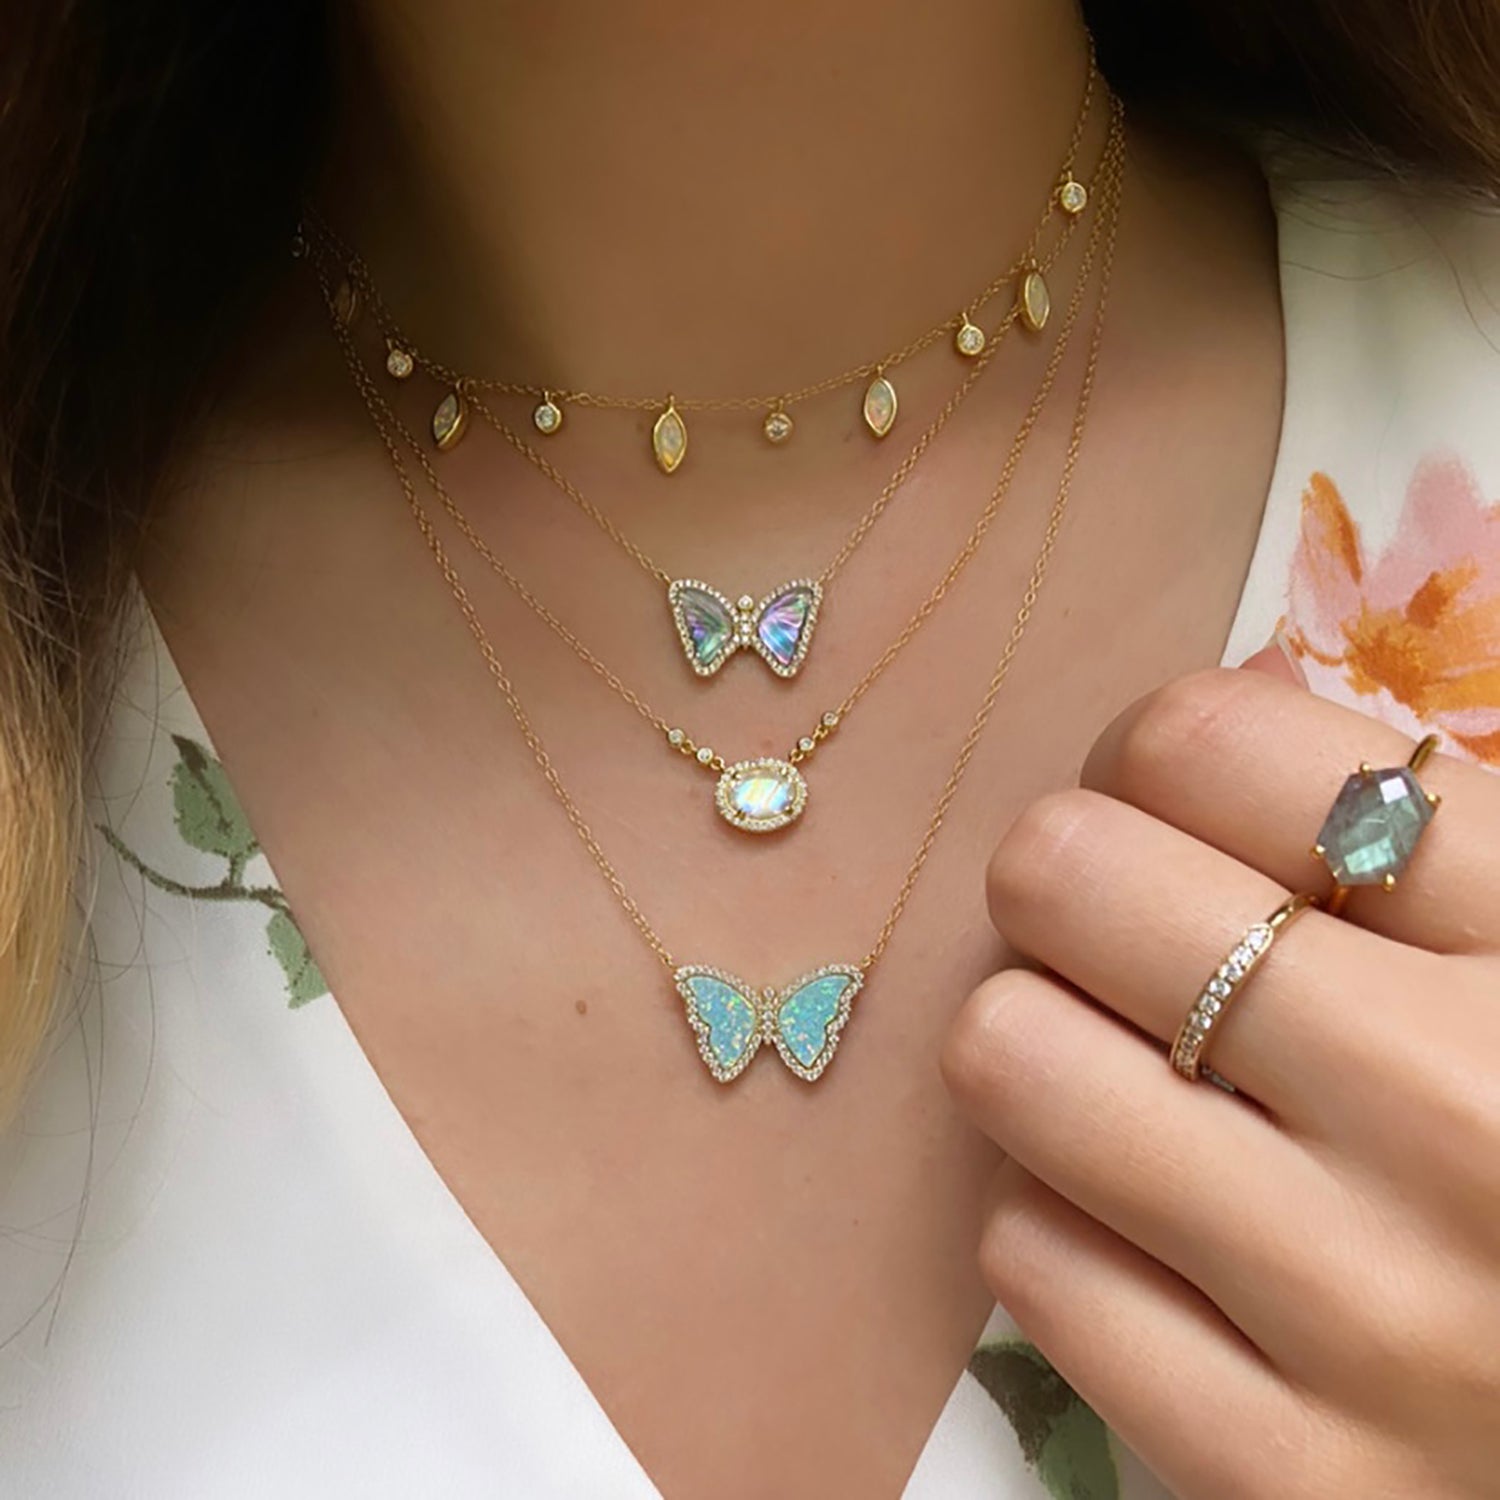 Opal Butterfly Necklace With Crystals in White Opal Gold